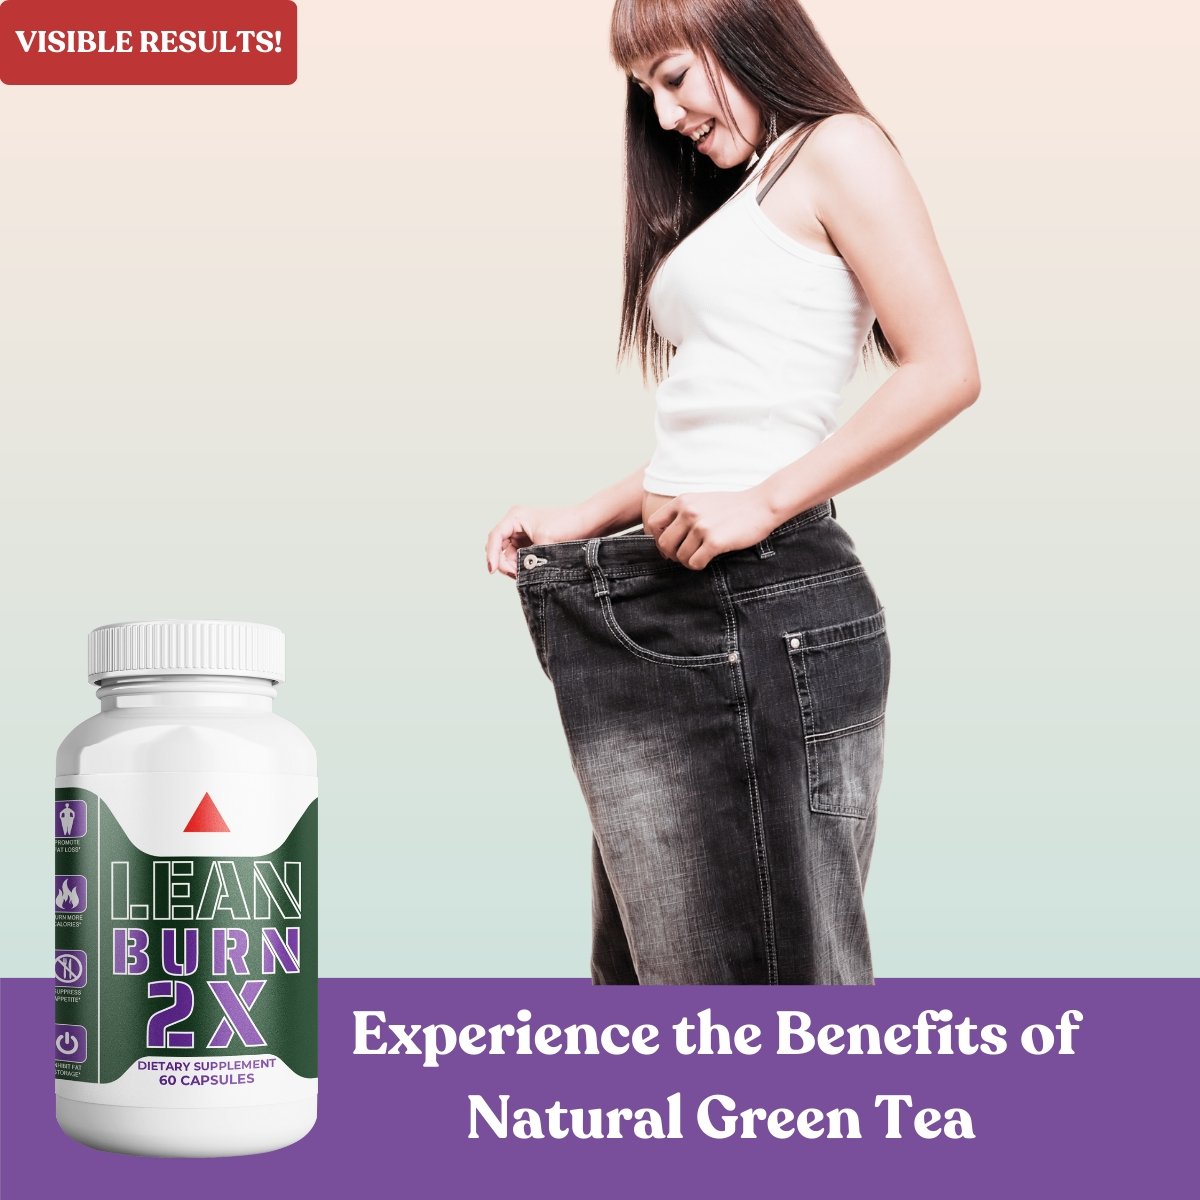 Fat Burner - Green Tea Extract with EGCG for Energy, Metabolism Boost